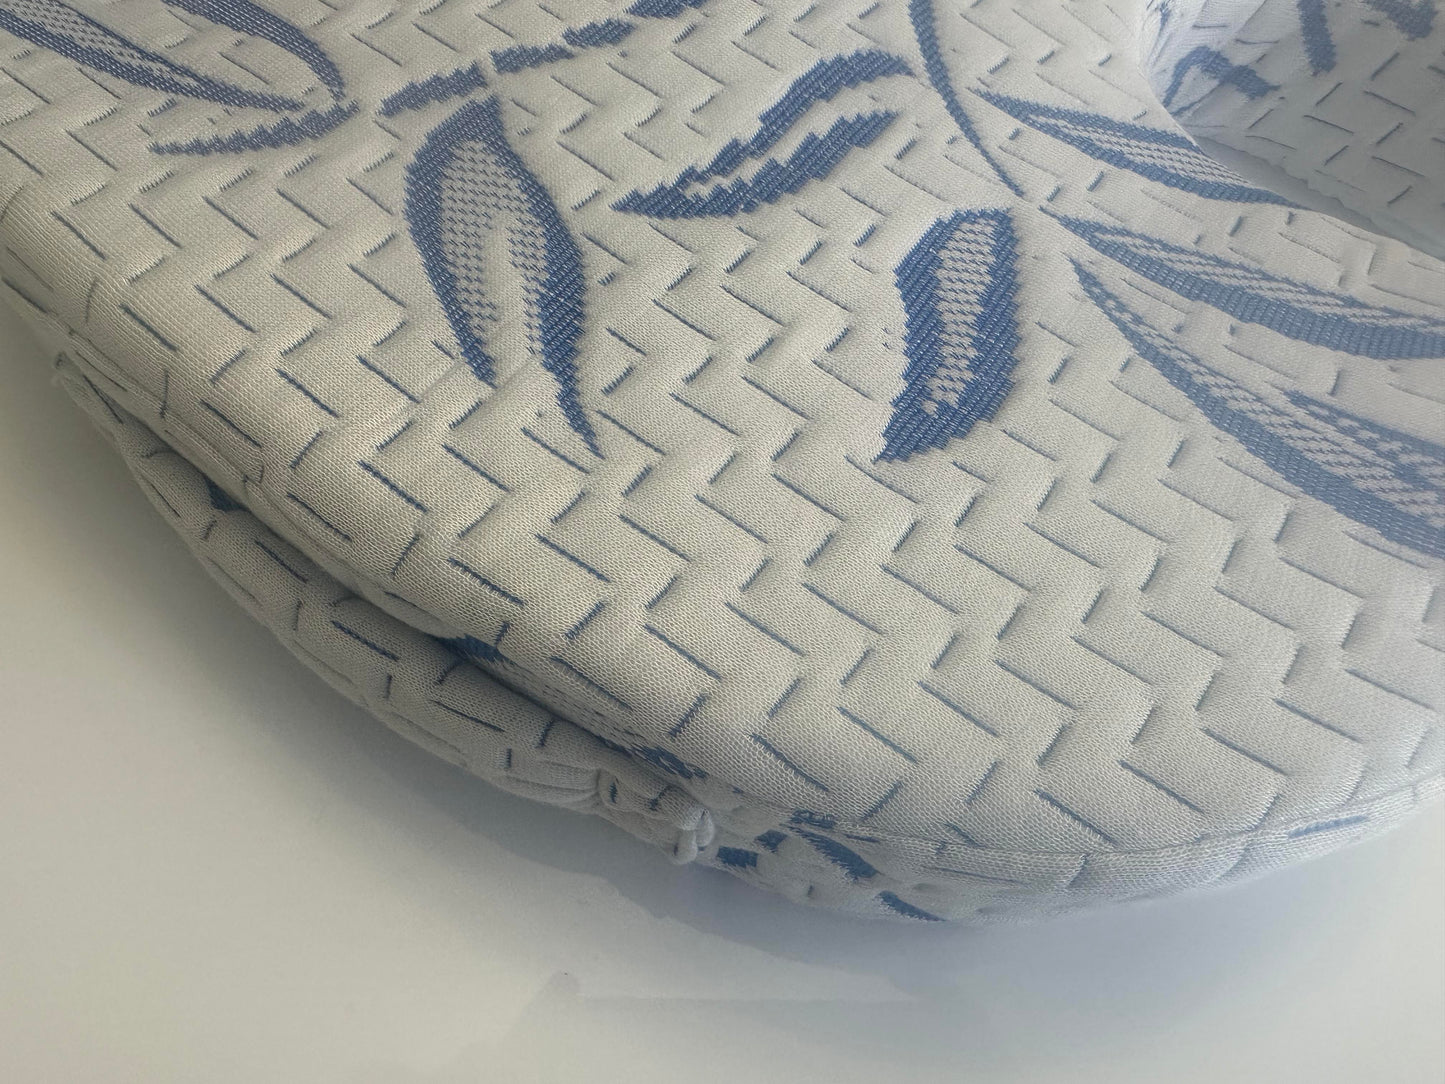 Seat Cushion Bamboo Pillow are manufactured from the memory foam and covered in our unique 40% Bamboo 60% rayon fabric. Seat Cushion Bamboo Pillow is comfortable, provide ultimate support, orthopedic, breathable